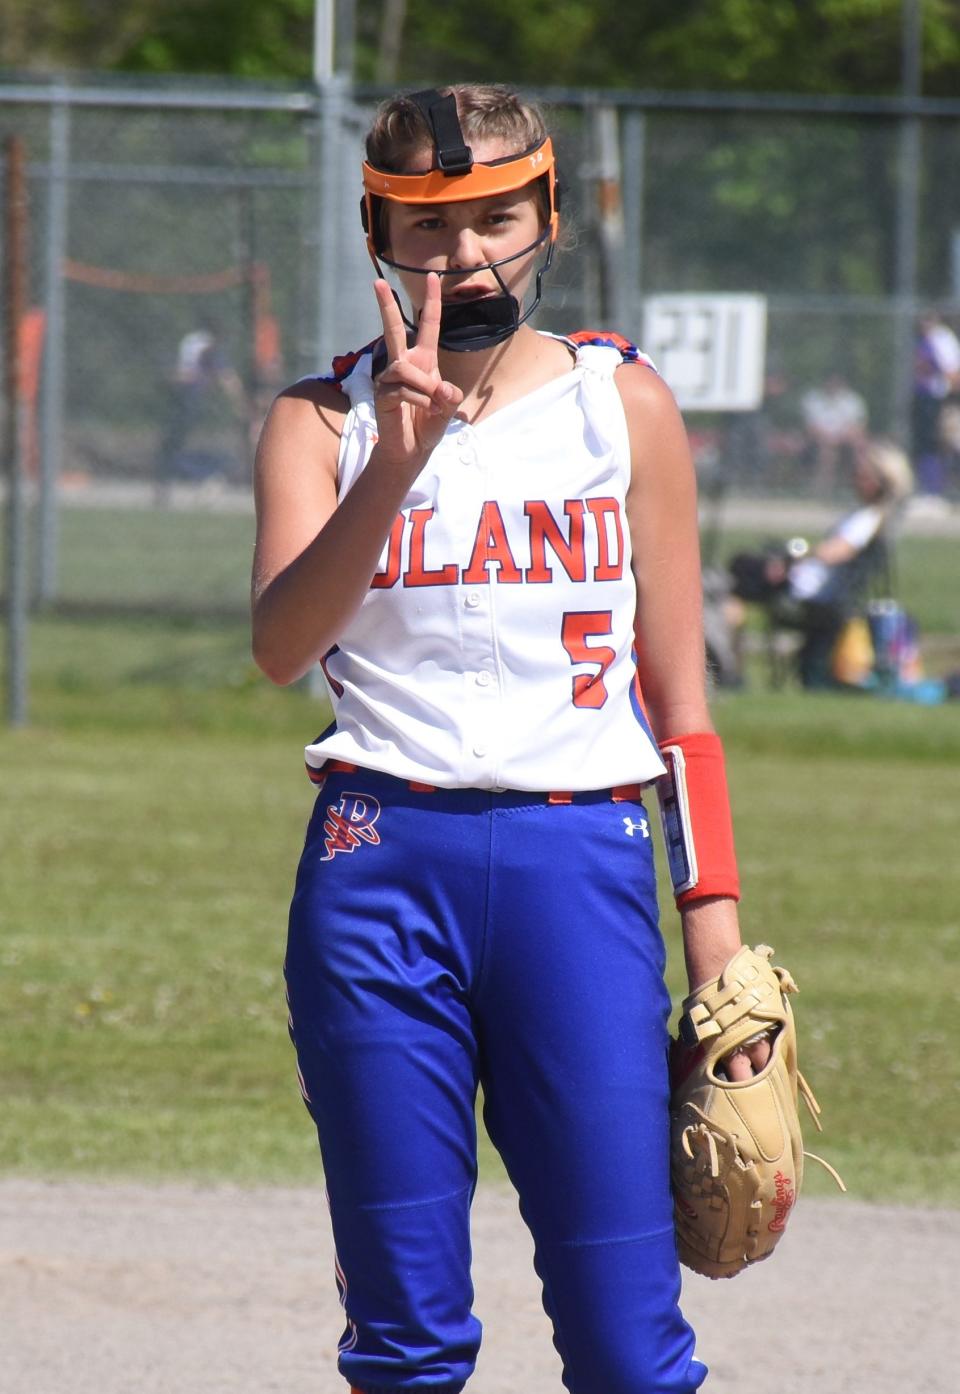 Poland pitcher Shelby Hagues, a senior who calls her own pitches, signals to her catcher May 13 during the Kristen Haver Tournament at the Mudville complex in Herkimer.